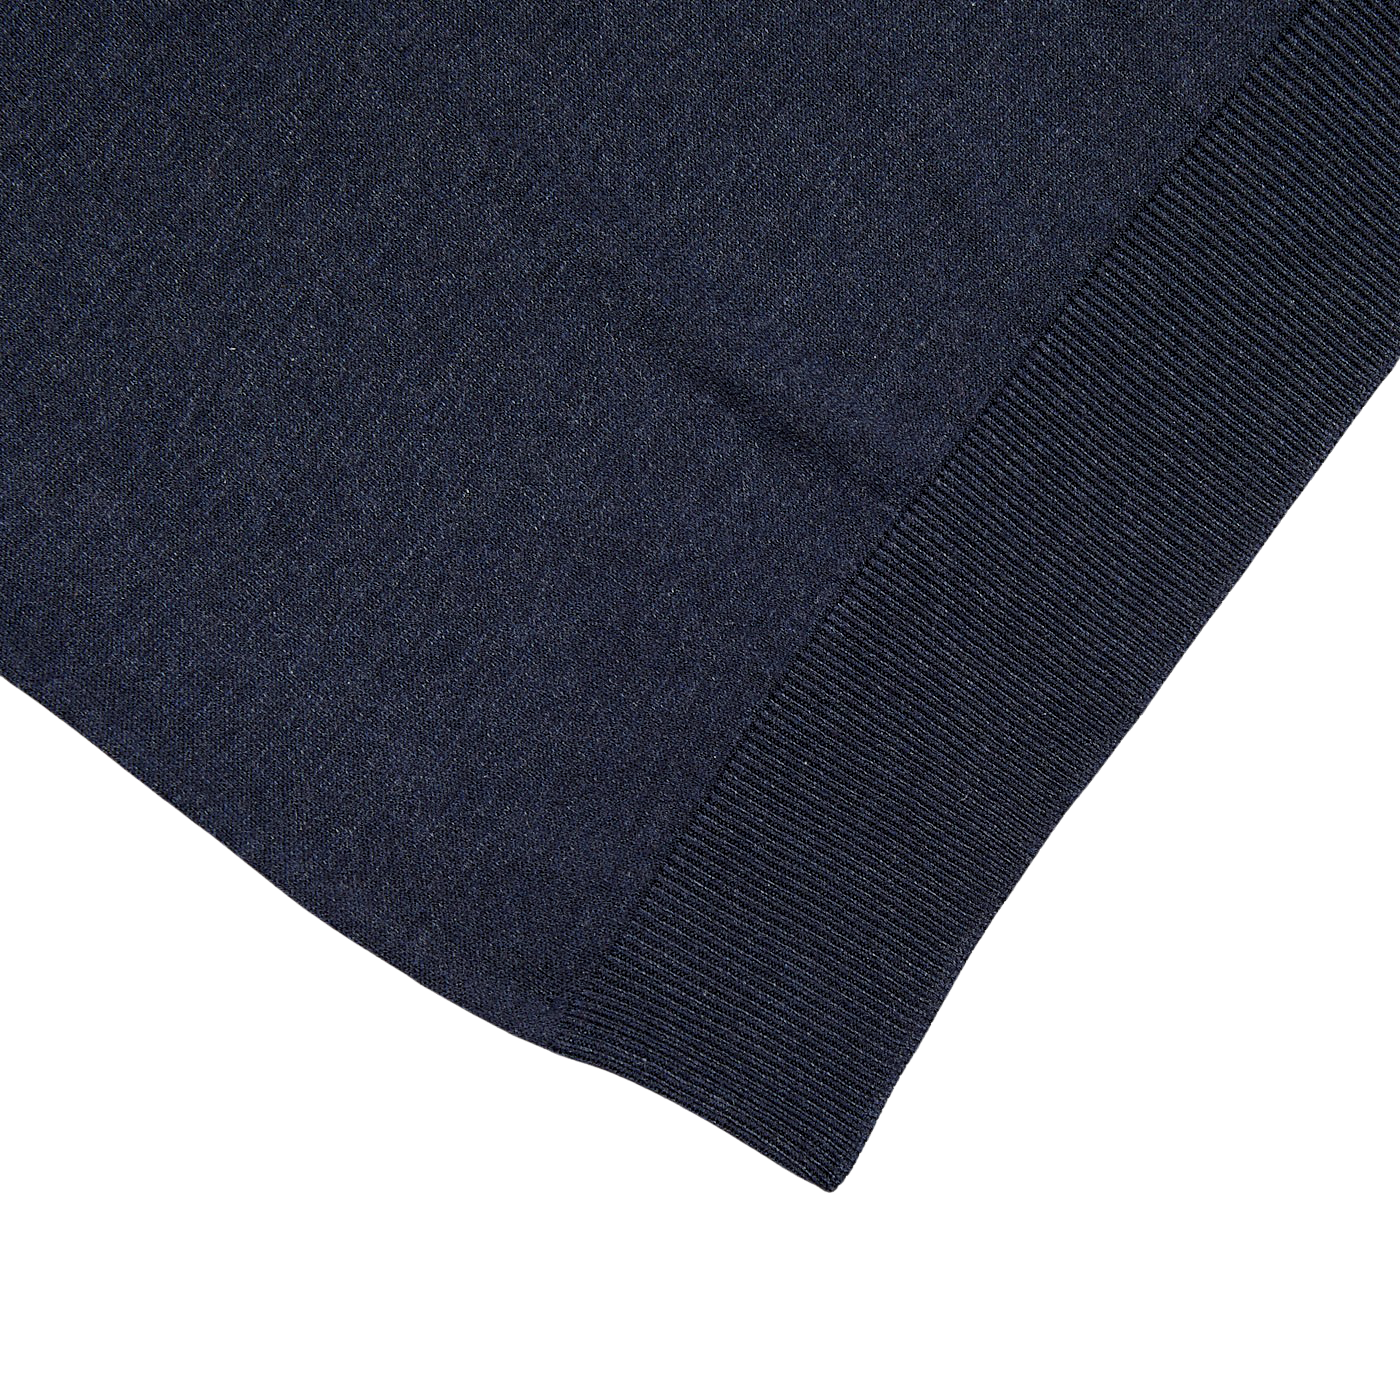 A close up of a Navy Blue Knitted Silk Polo Shirt with a textured Gran Sasso finish.